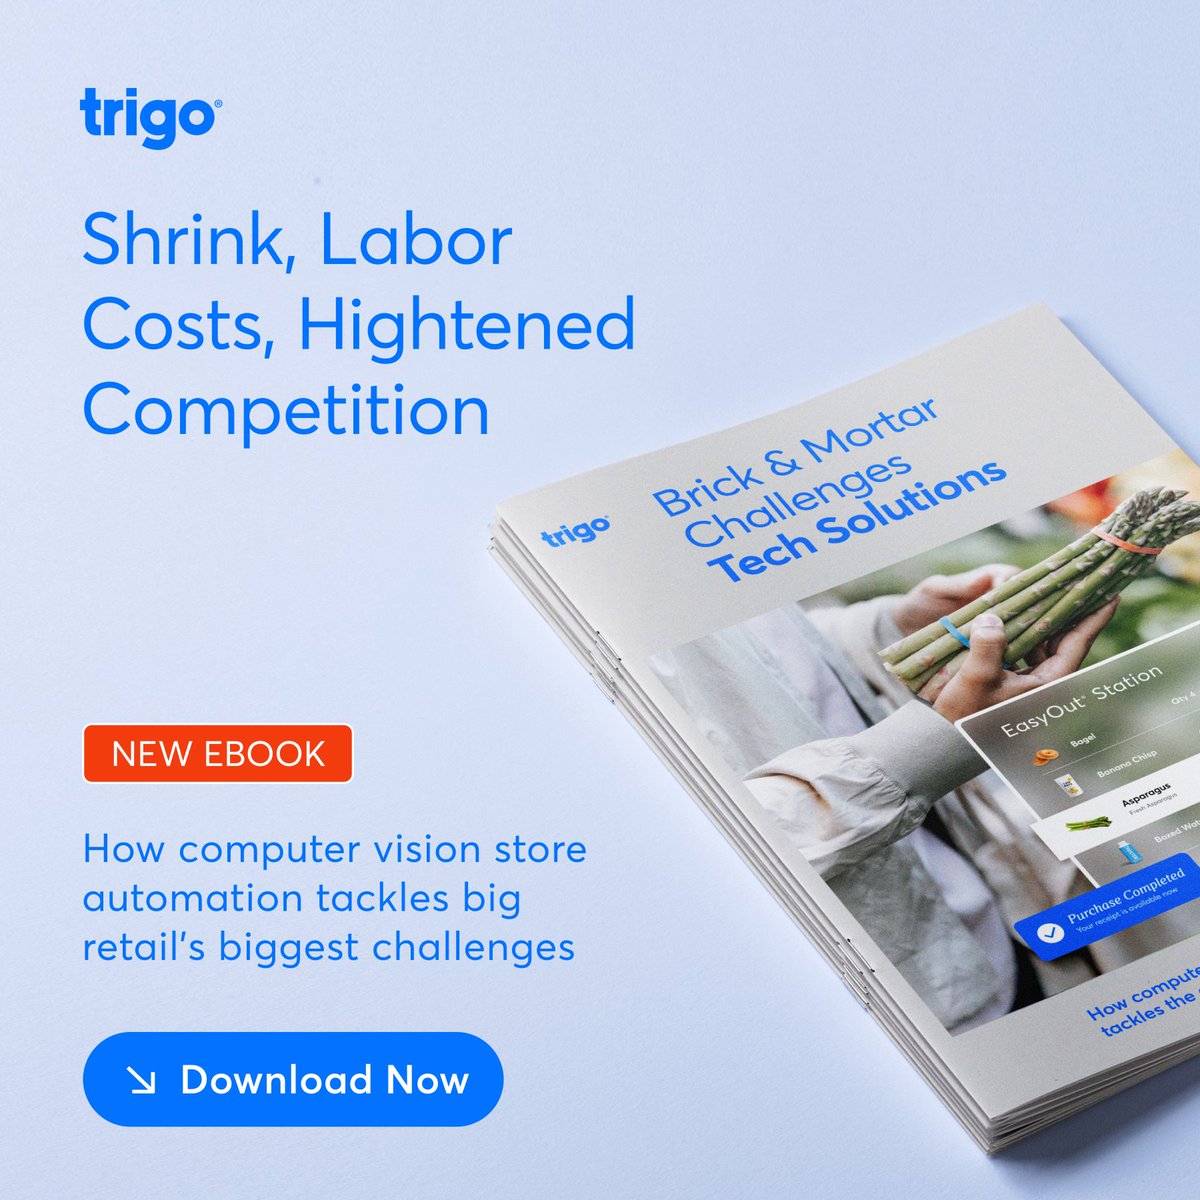 Brick-and-mortar challenges are no match for cutting-edge retail technology. Trigo's new eBook breaks down retailers' economic and operational challenges and explores emerging tech solutions. Download it now: bit.ly/45CKhN5